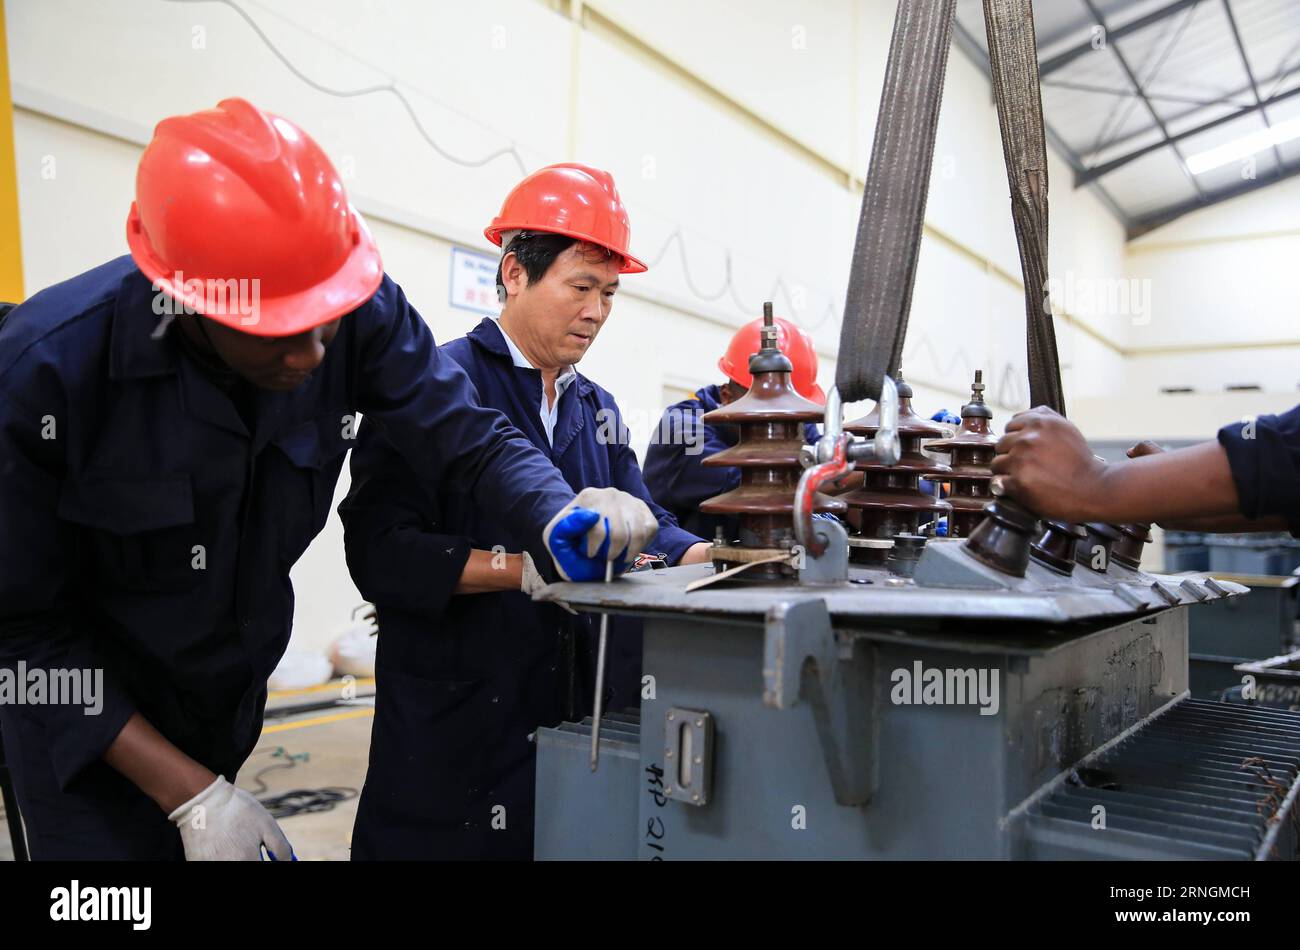 (161006) -- NAIROBI, Oct. 6, 2016 -- A Chinese engineer guides Kenyan technicians to work at Yocean manufacturing transformers factory on the outskirts of Nairobi, Kenya, on Oct. 5, 2016. Kenya s first transfomer-manufacturing plant, set up by Chinese company Yocean Group, opened on Wednesday. Kenya has been relying on transformers from abroad, mostly from India. Kenya s Cabinet Secretary for Energy and Petroleum, Charles Keter, said the plant will ease procurement of transformers and other electrical appliances. ) (dtf) KENYA-NAIROBI-ENERGY-CHINA-TRANSFORMER PanxSiwei PUBLICATIONxNOTxINxCHN Stock Photo